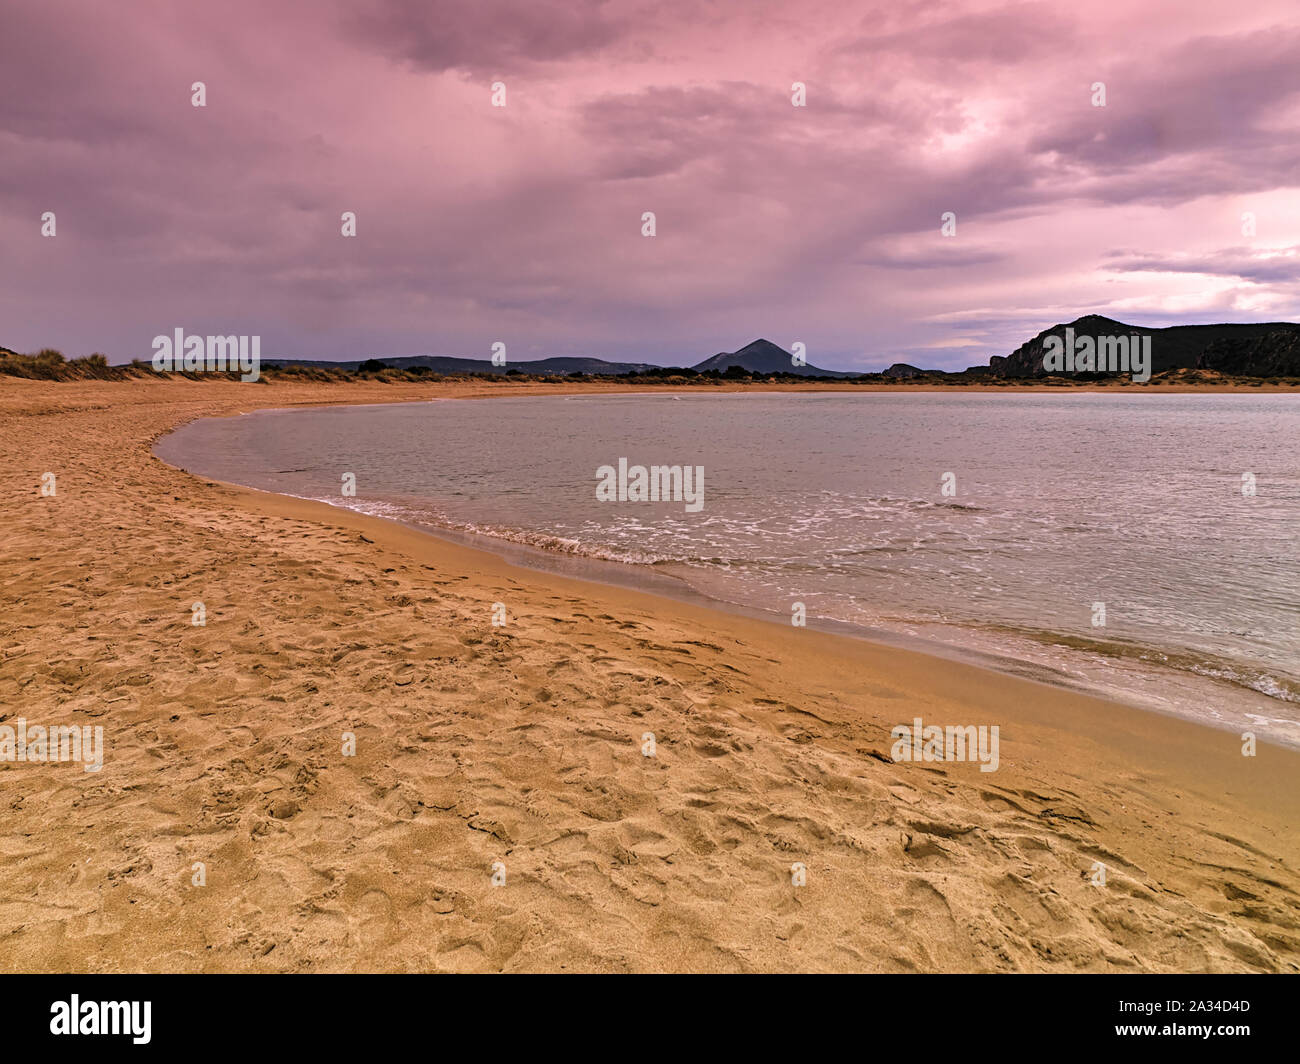 Sandy beach and dramatic cloudy sky at sunset time, Voidokoilia, Peloponnese Greece. Stock Photo